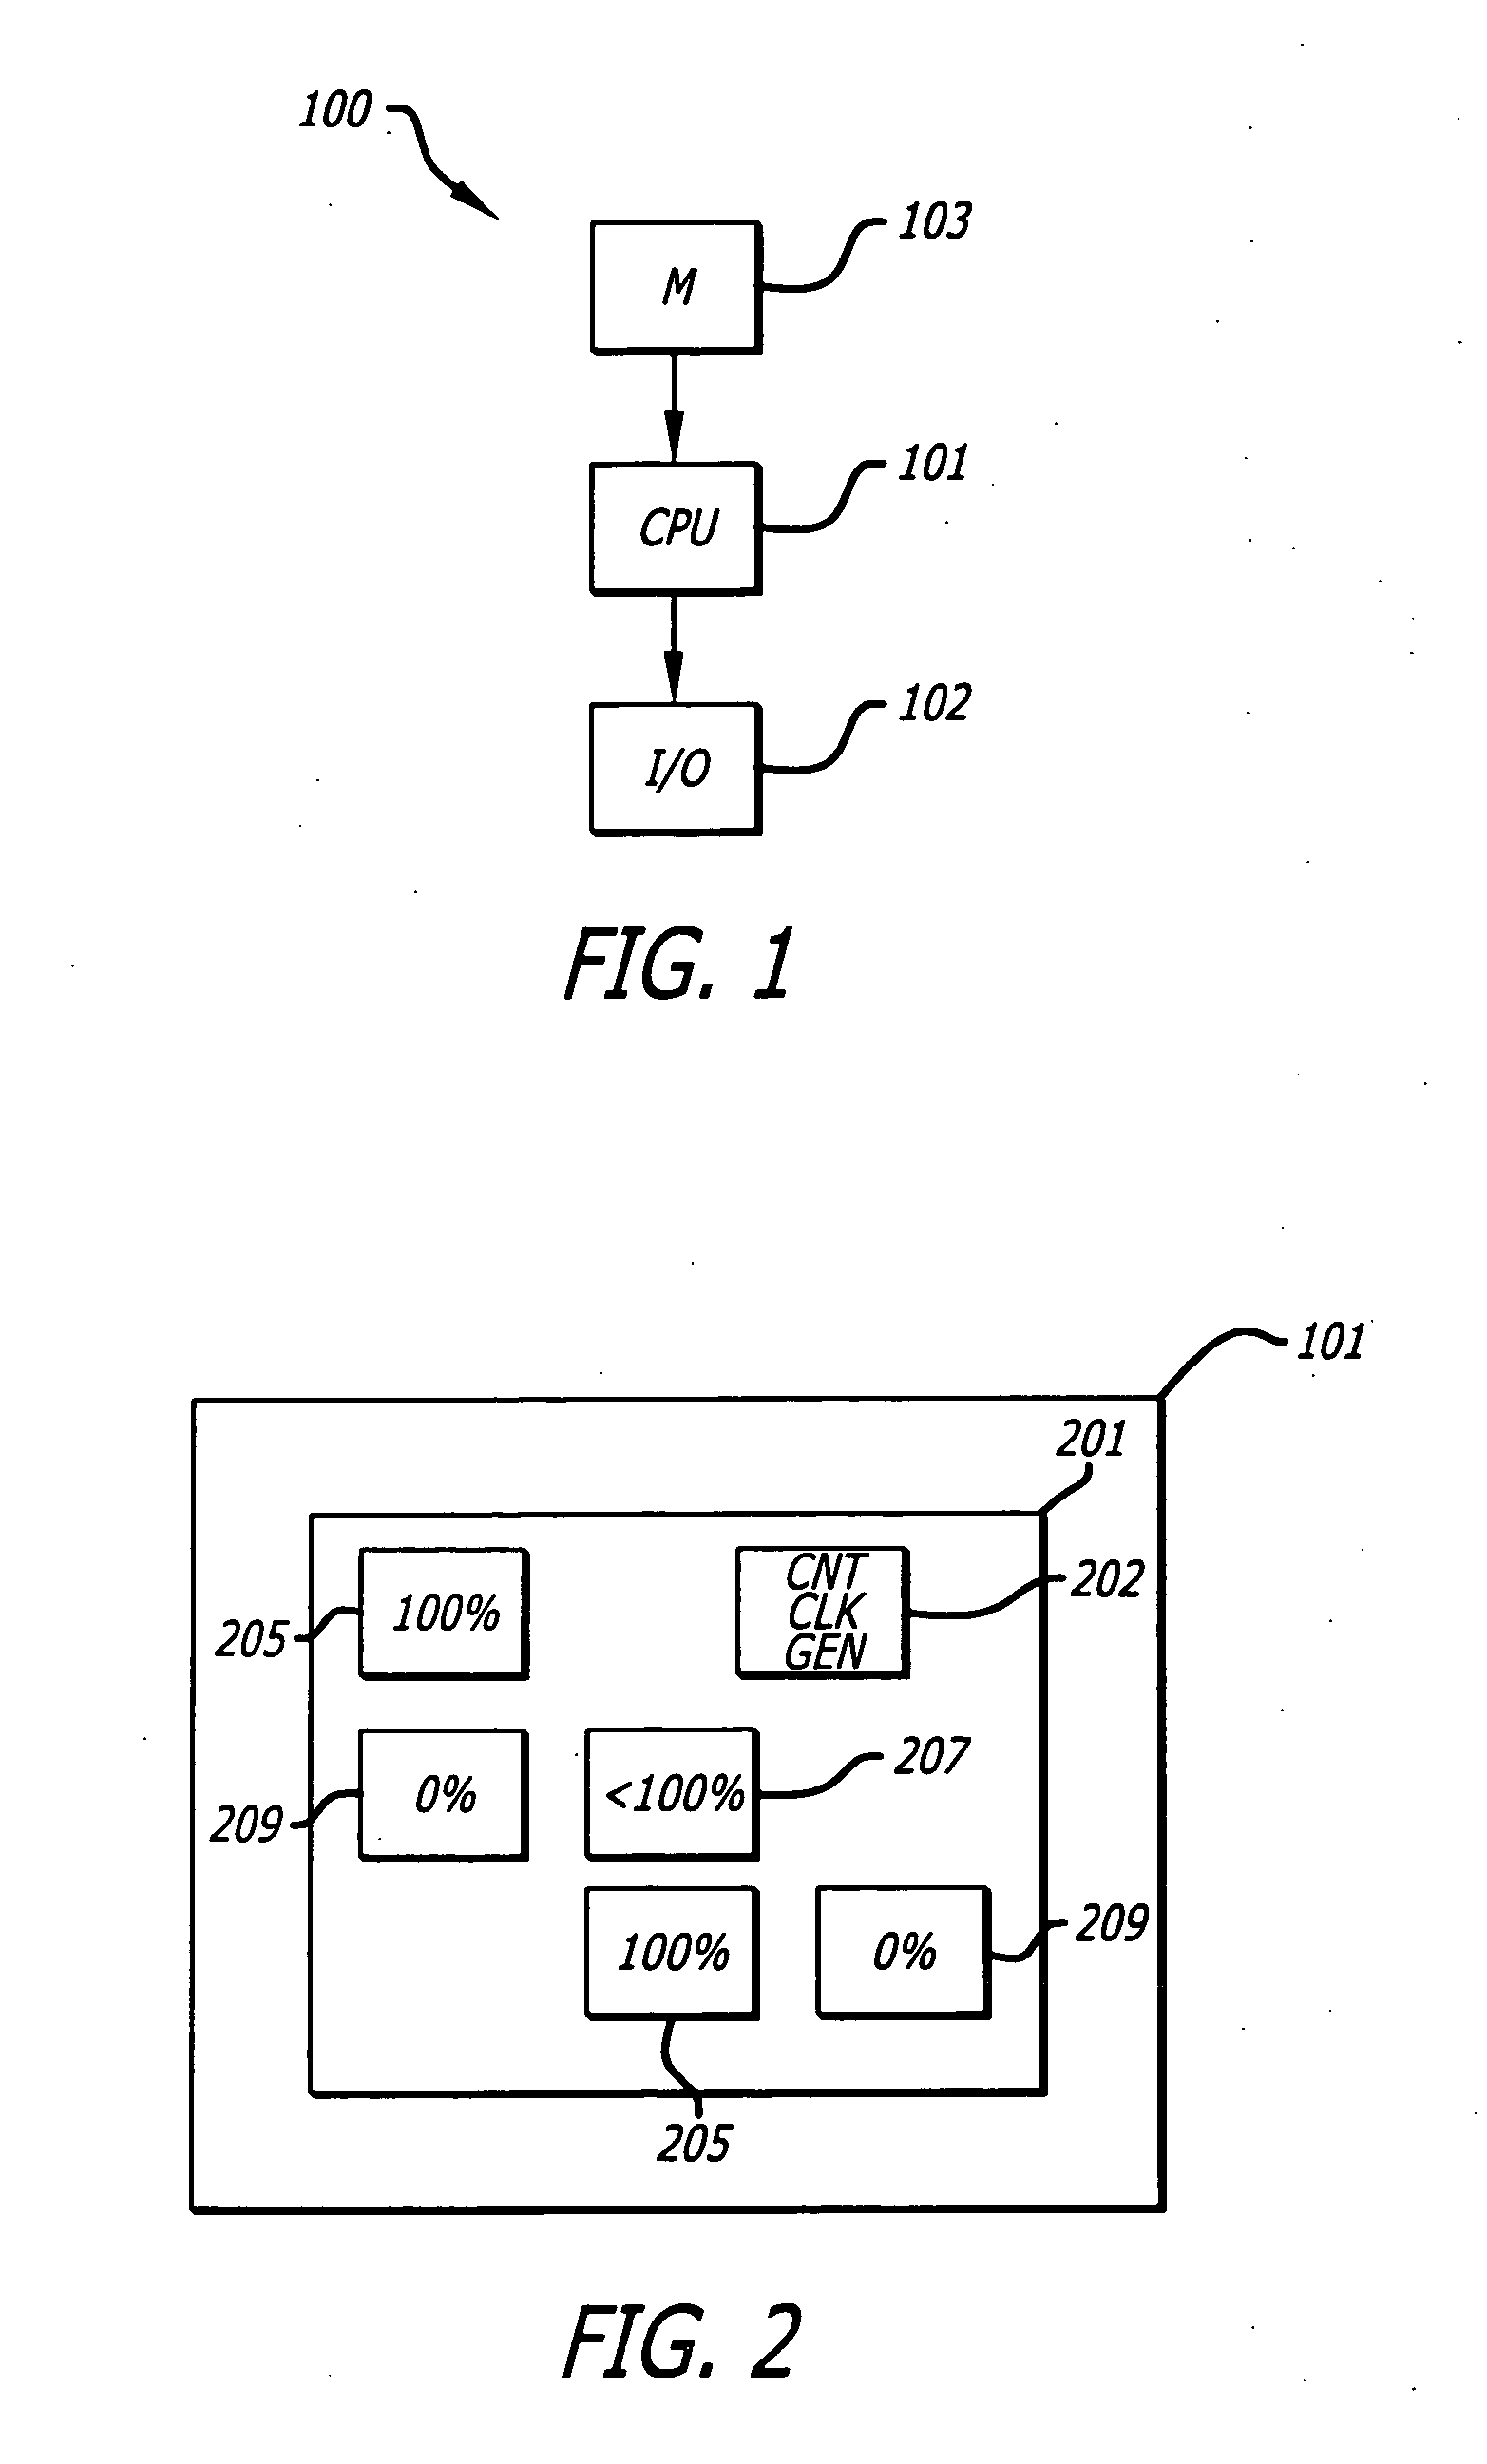 Methods of clock throttling in an integrated circuit